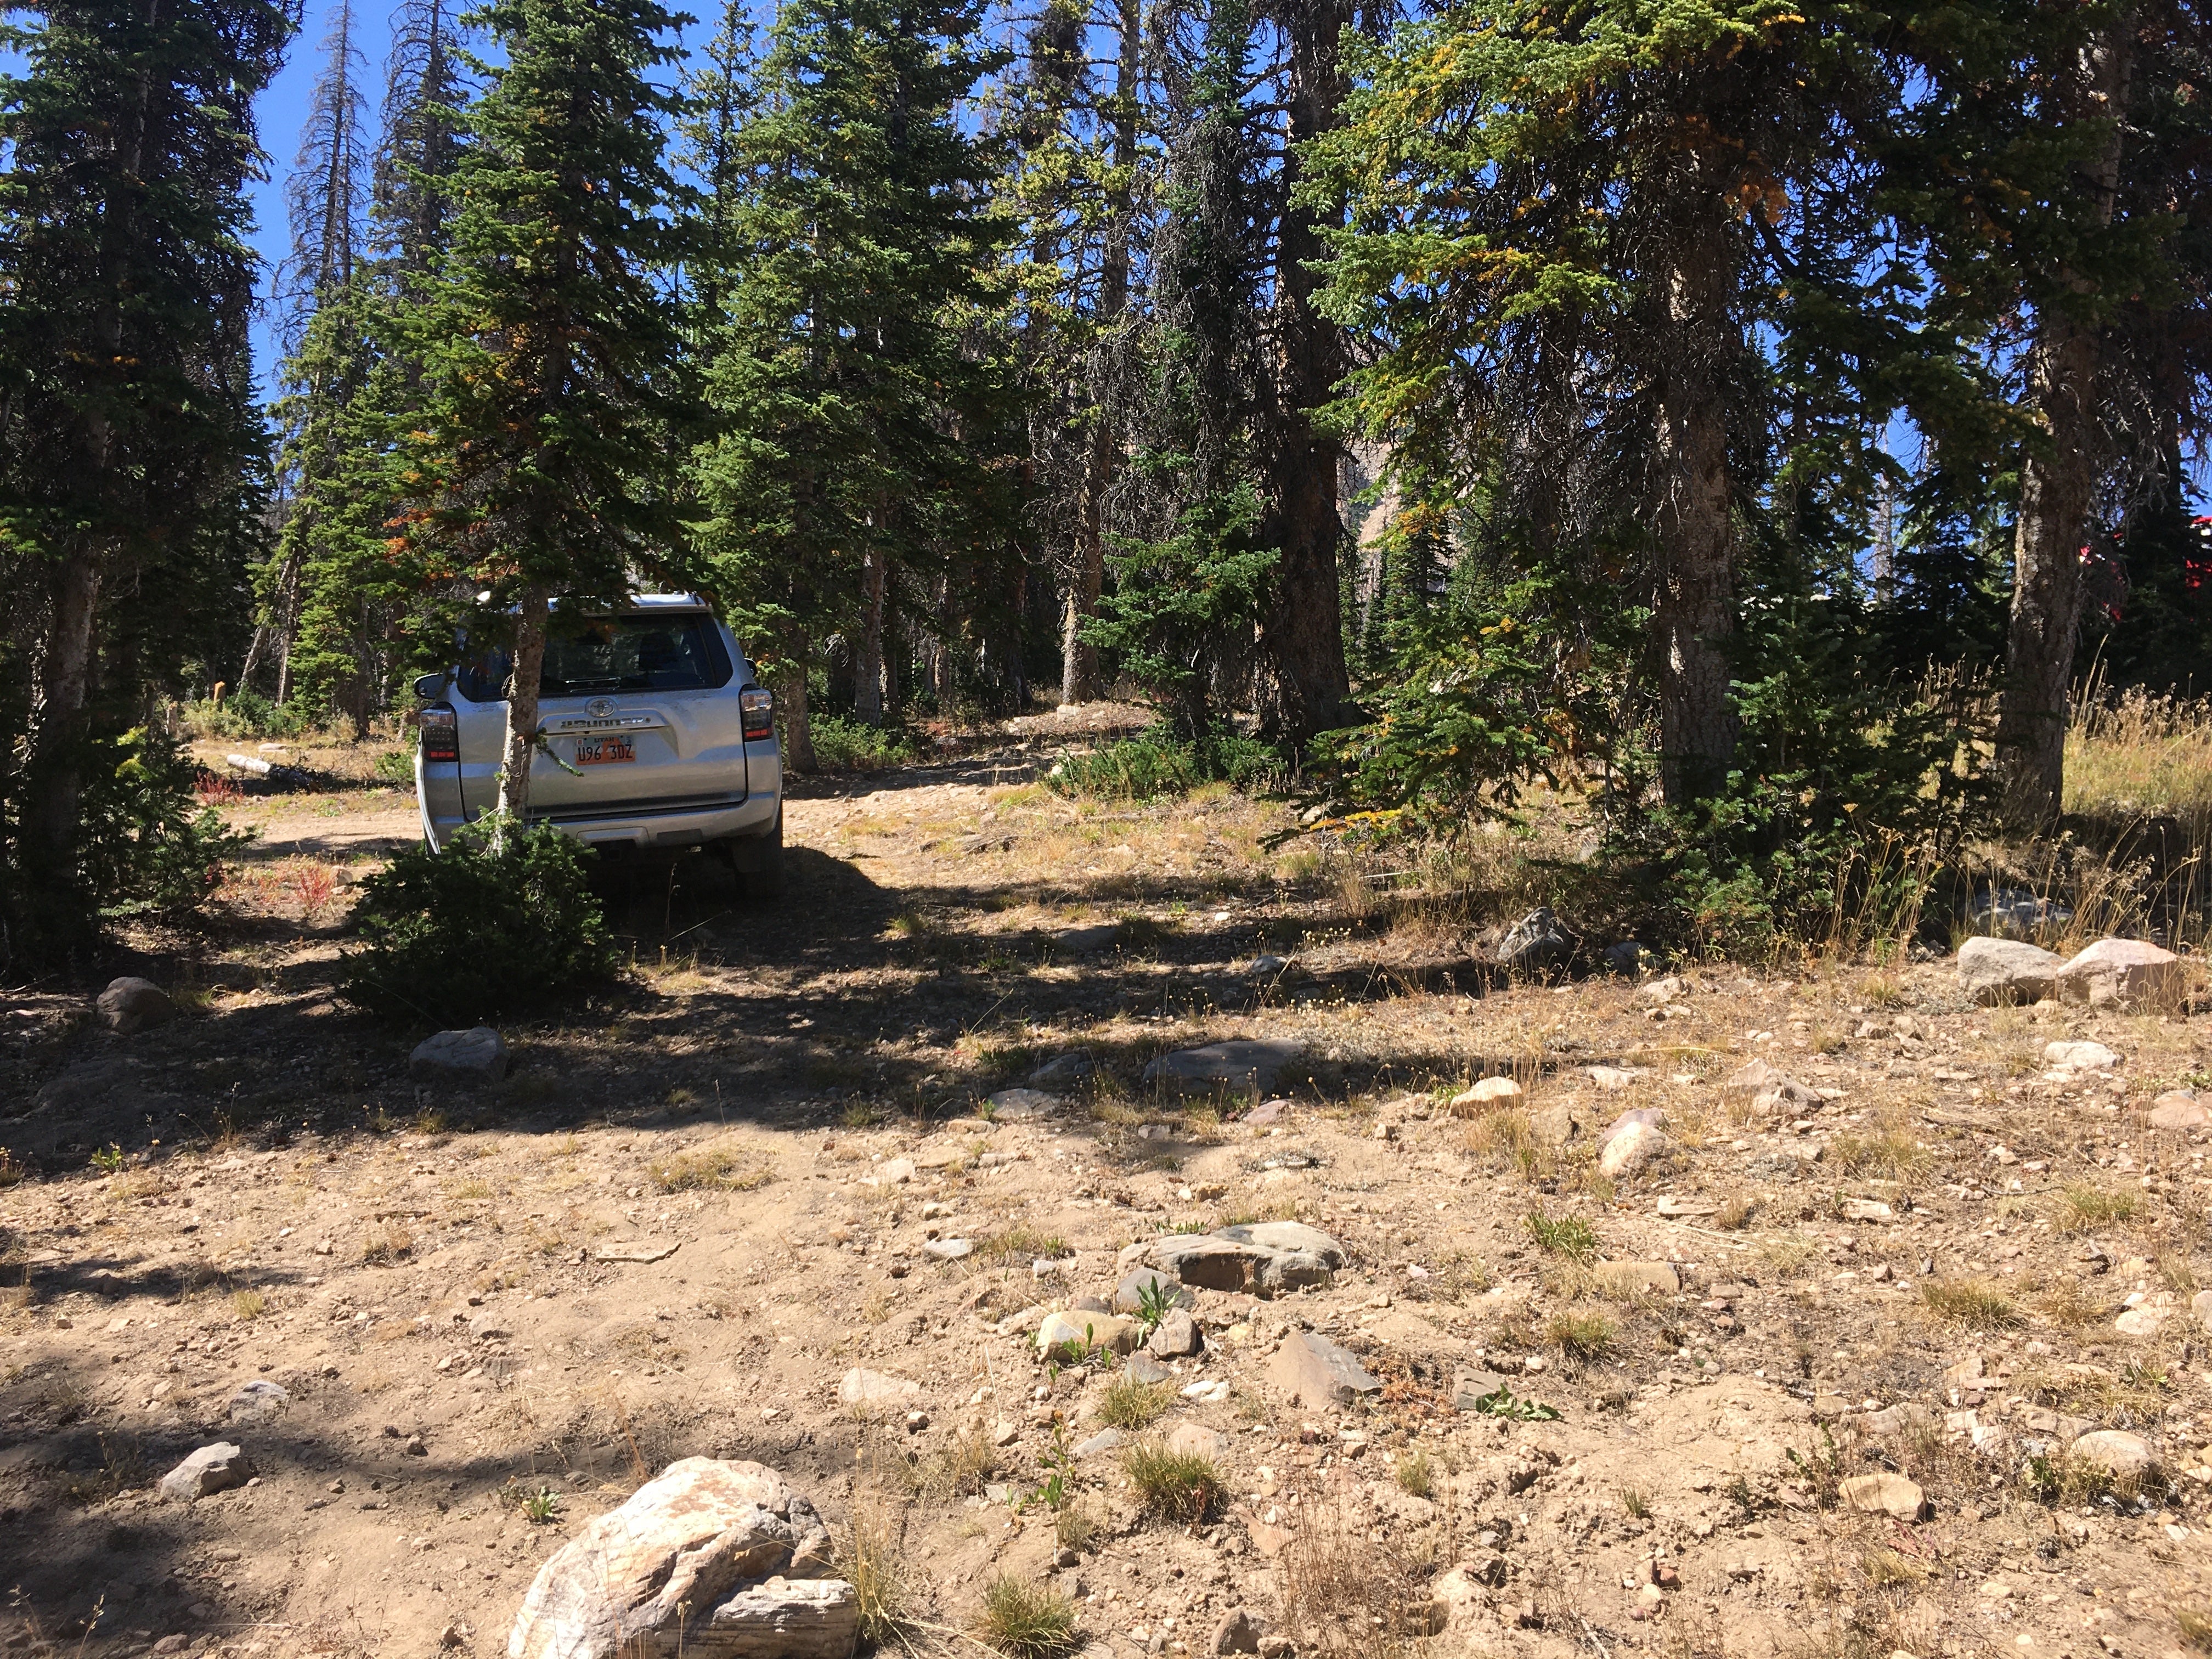 Camper submitted image from Moosehorn Dispersed Camping - 3